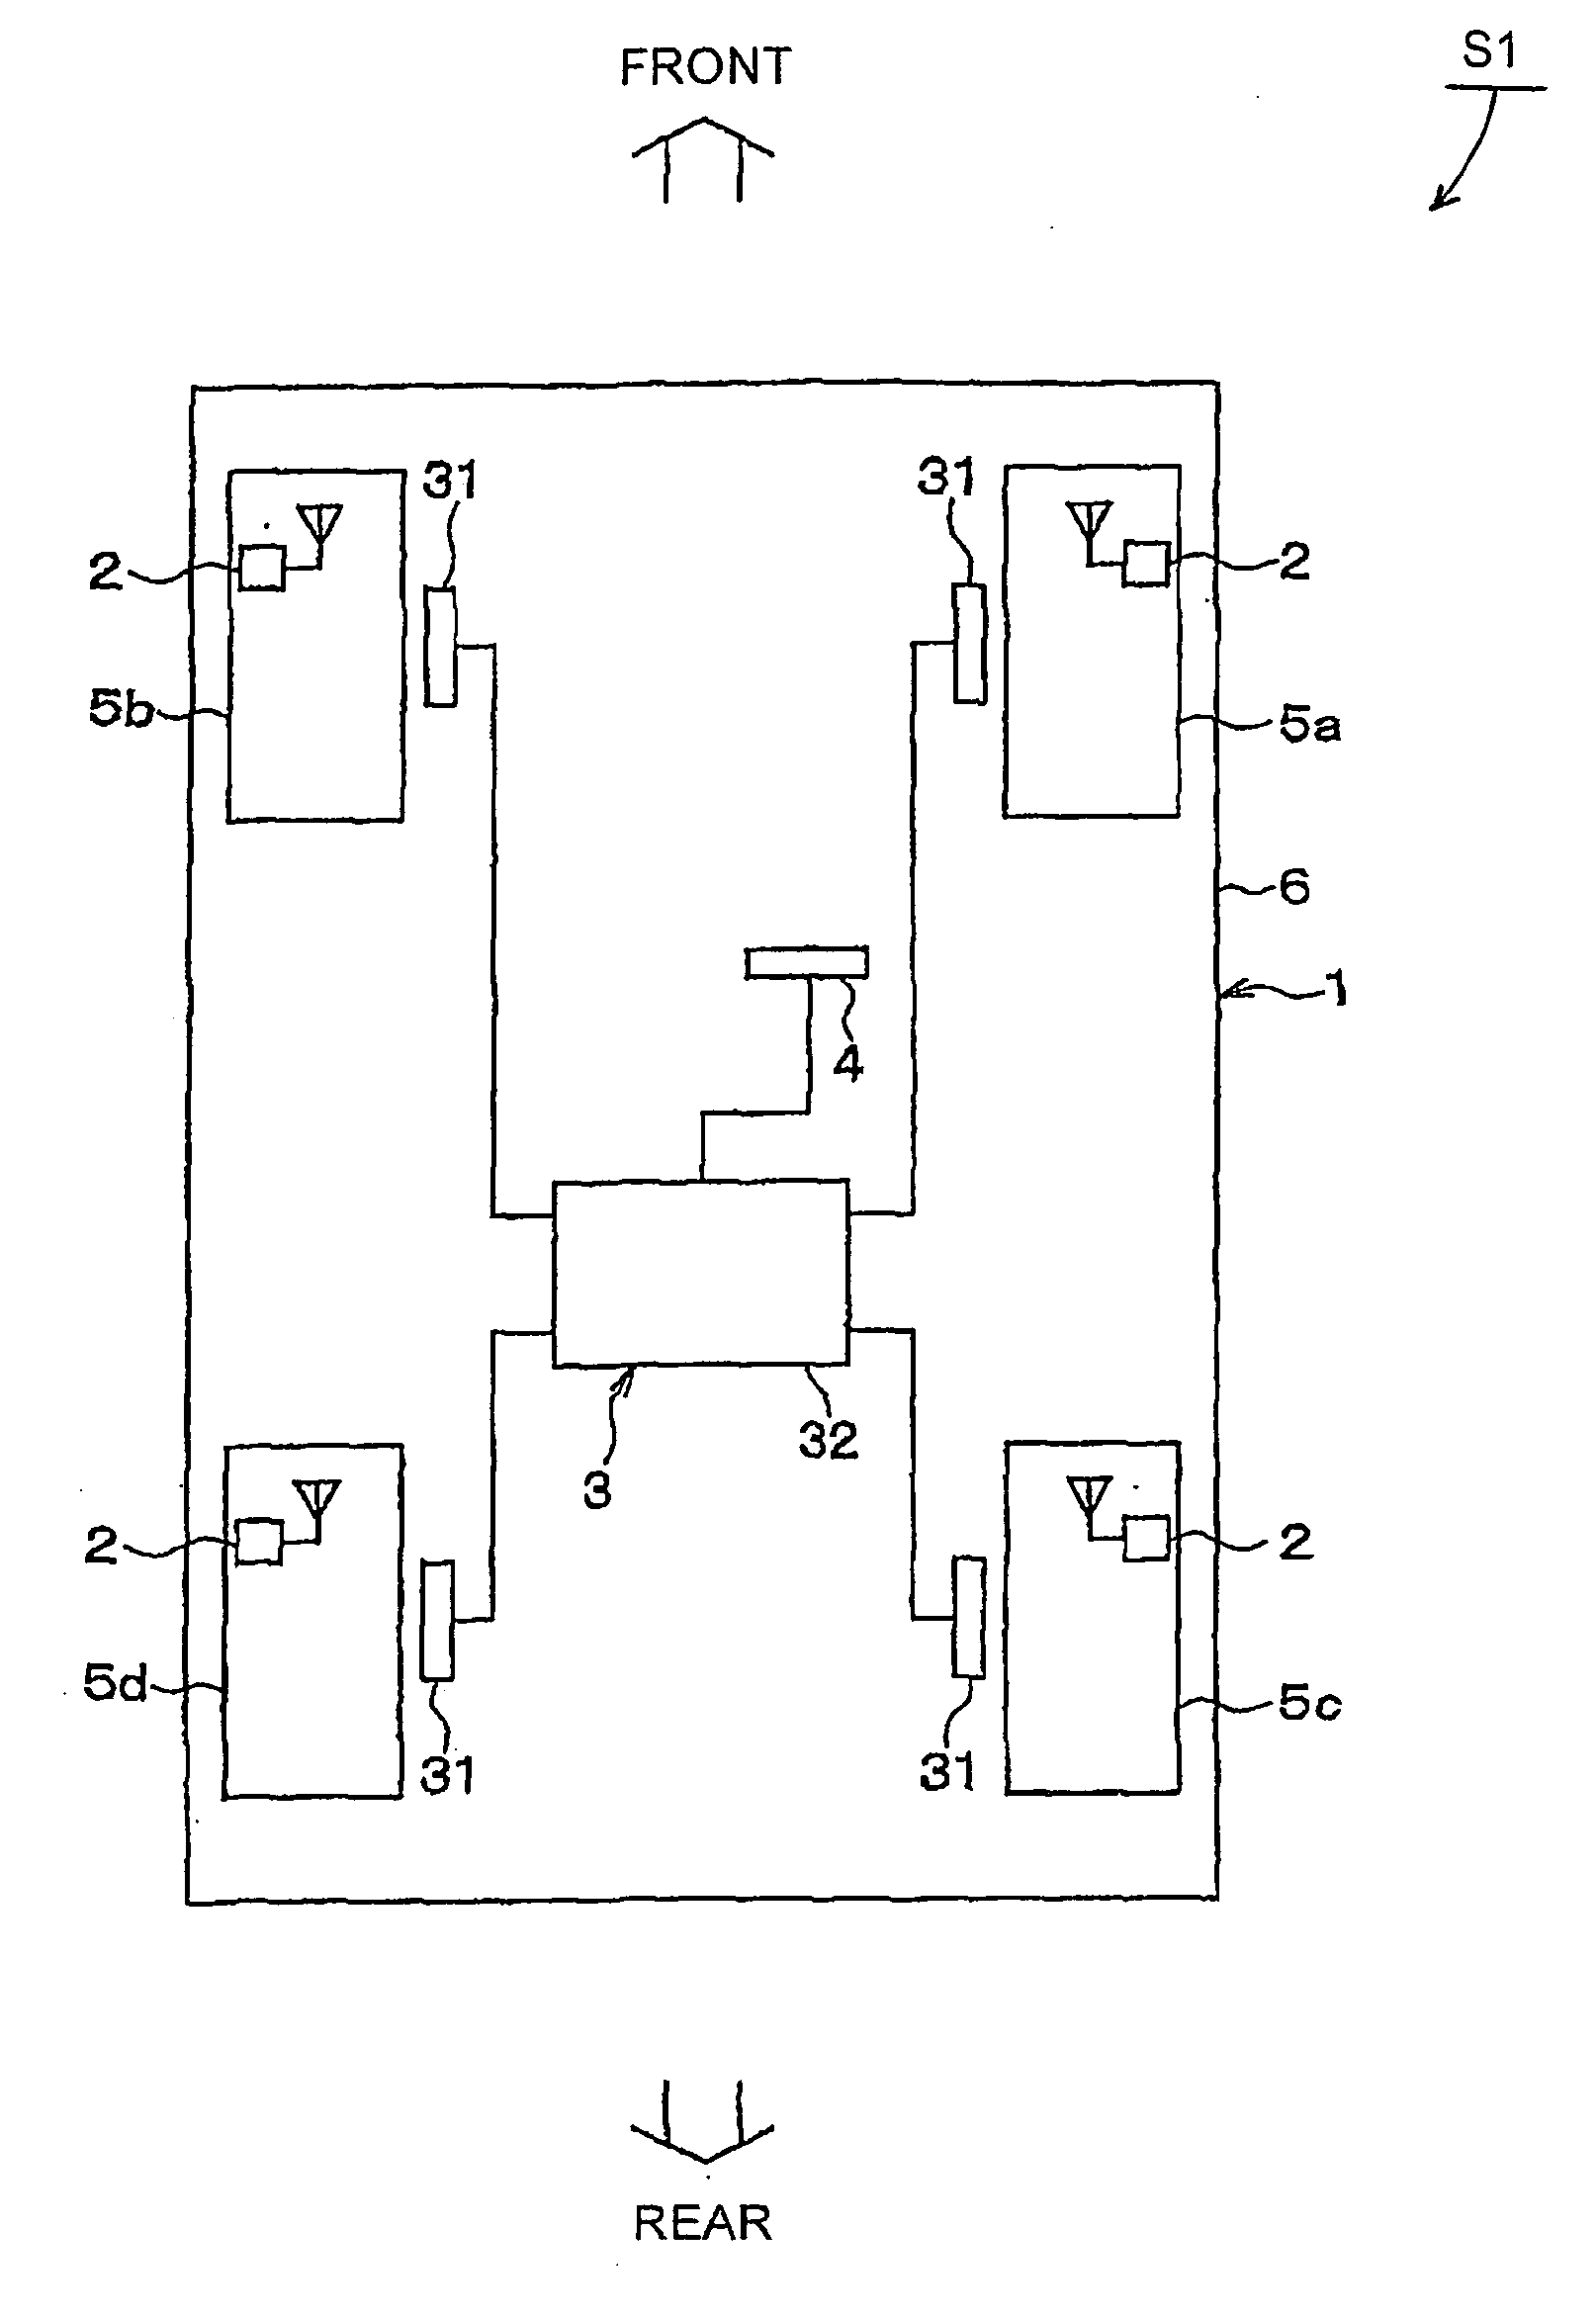 Tire inflation pressure sensing apparatus with high reliability and power-saving capability